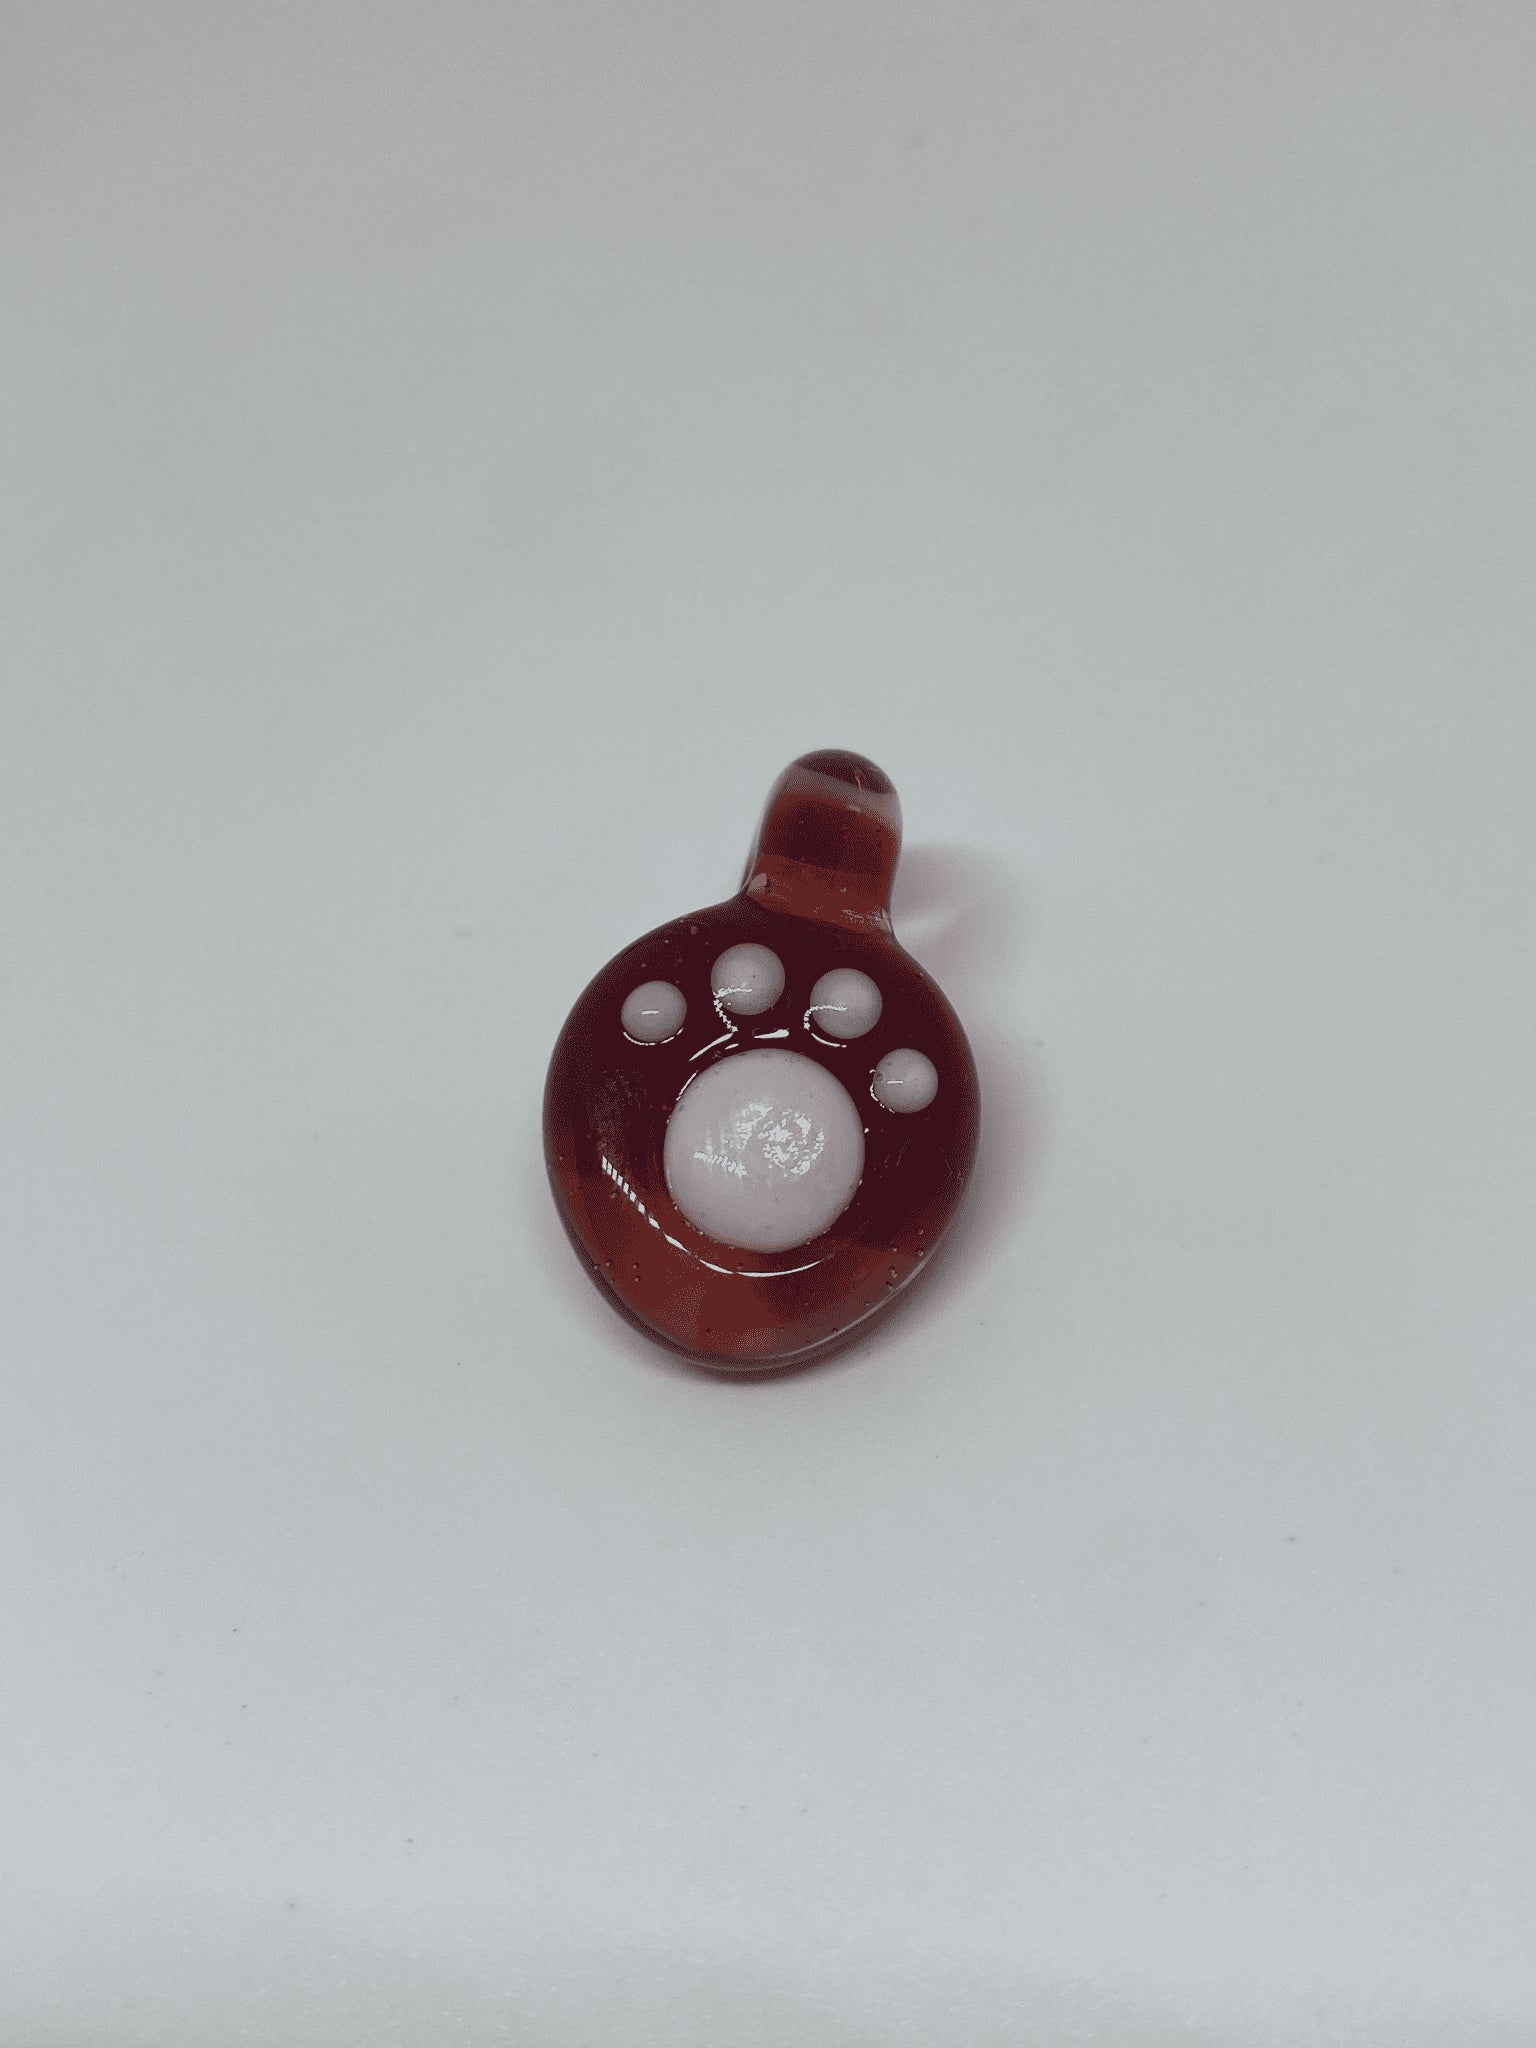 sophisticated glass pendant - Pomegranate Pet Paw Pendant by Alexander The Great Glass